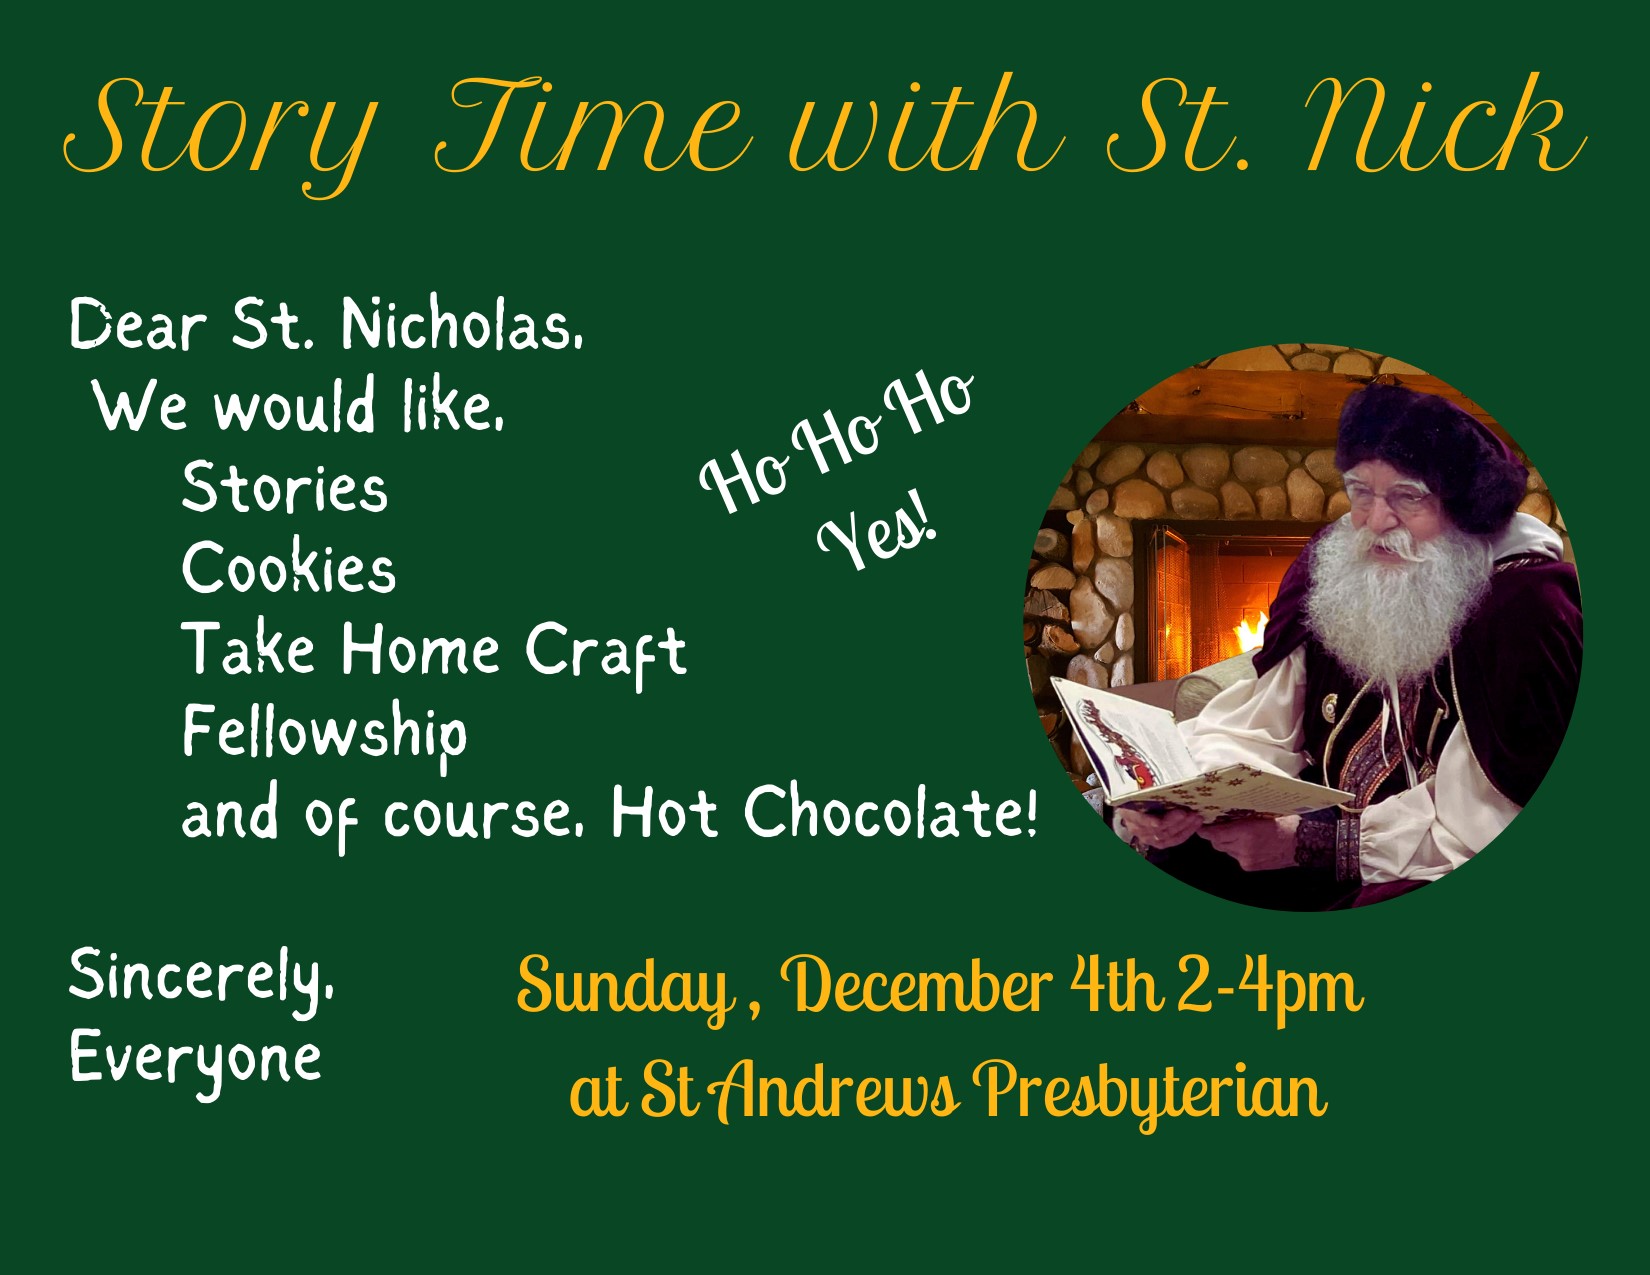 Story Time With St. Nick 12/4, 2-4PM